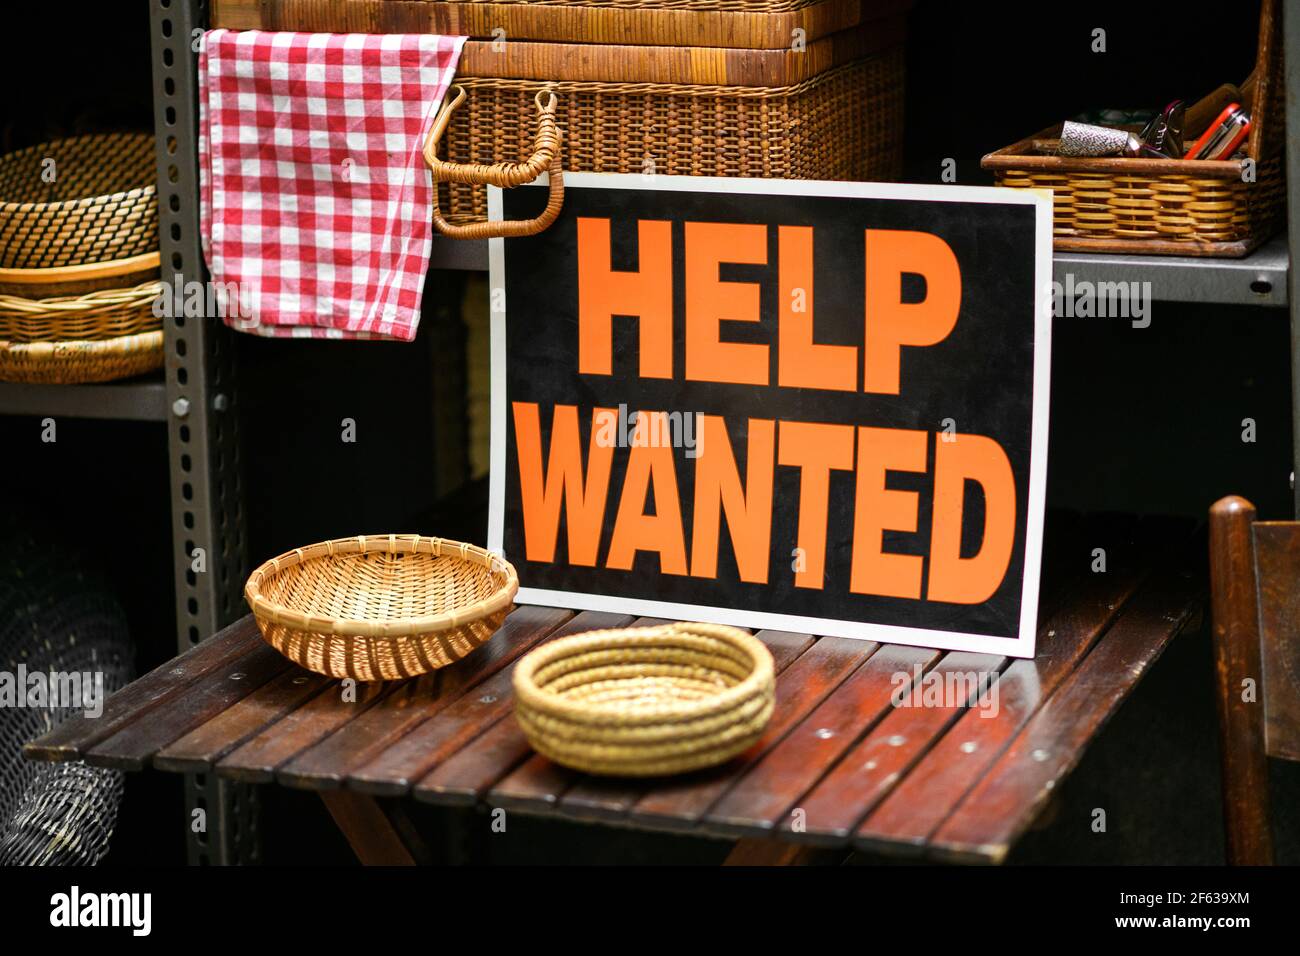 Help Wanted sign displayed in a shop selling woven baskets in a job vacancy, hiring and employment concept Stock Photo